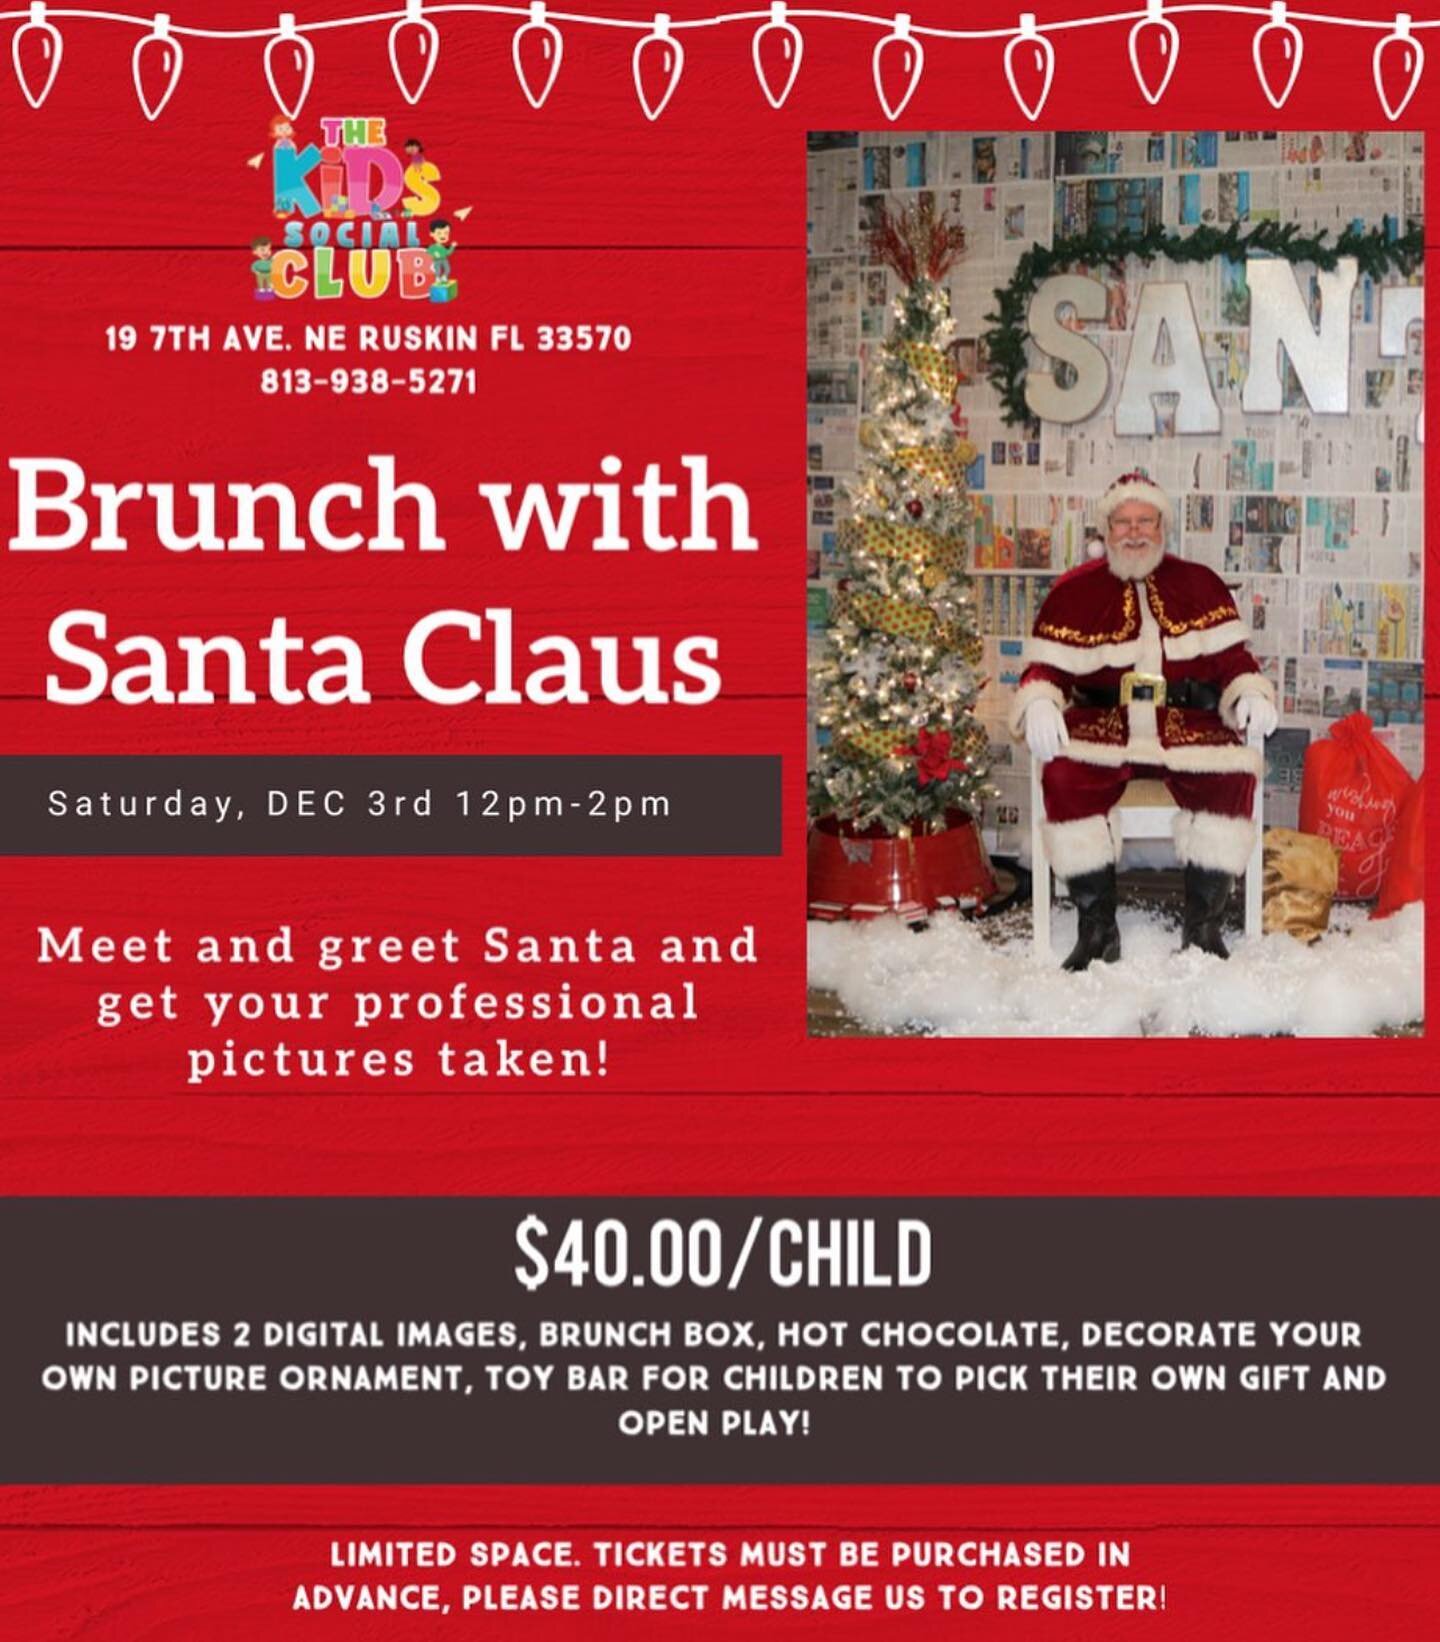 ONLY 2 TICKETS LEFT! 

Brunch with Santa Claus tomorrow, Saturday Dec. 3rd 12pm-2pm 🎅🏻🎄

Meet and greet Santa and get your professional pictures taken!

Saturday, December 3rd &bull; 12pm-2pm &bull; $40.00/Child 

Includes 2 digital images, cookie